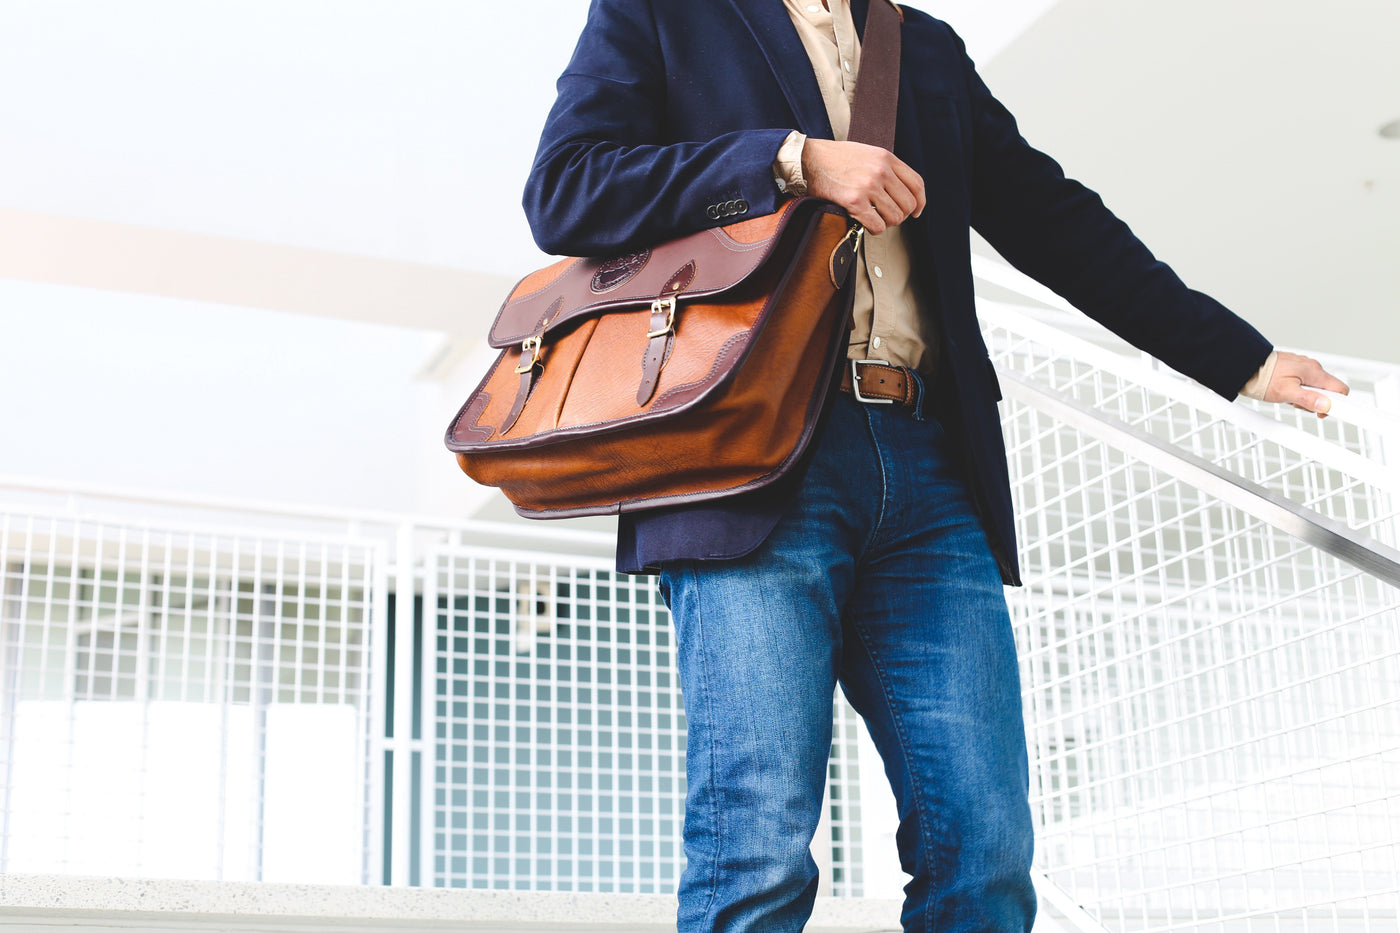 Bison Leather Executive Briefcase Bag The Buffalo Wool Co. 